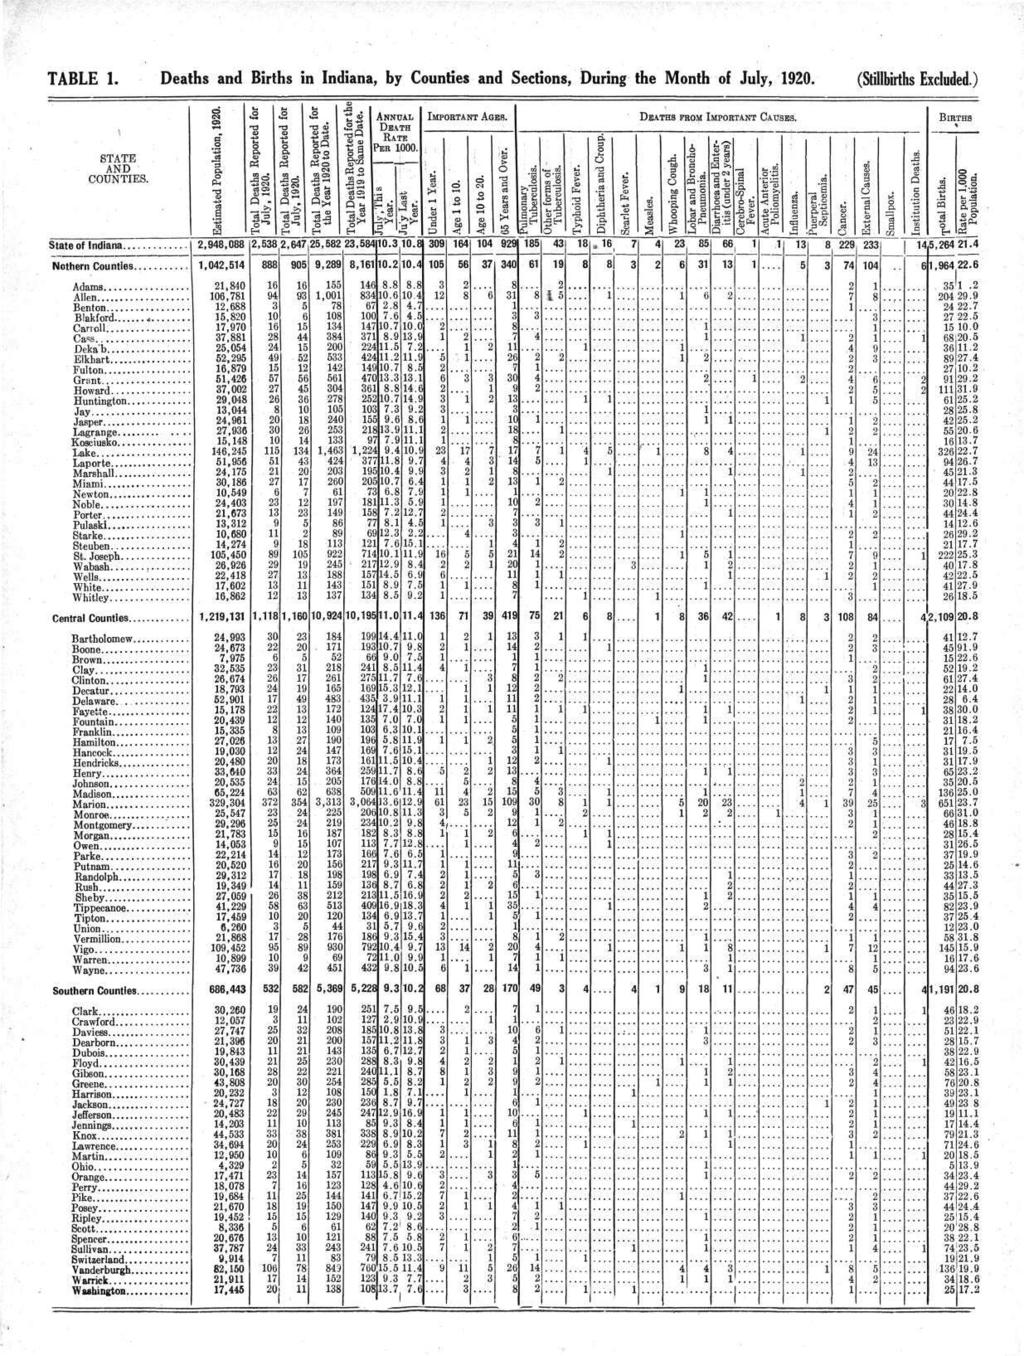 TABLE 1. Deaths and Births in Indiana, by Counties and Sections, During the Month of July, 1920. (Stillbirths Excluded.) STATE AND COUNTIES. Estimated Population, 1920. Deaths Reported for July, 1920.